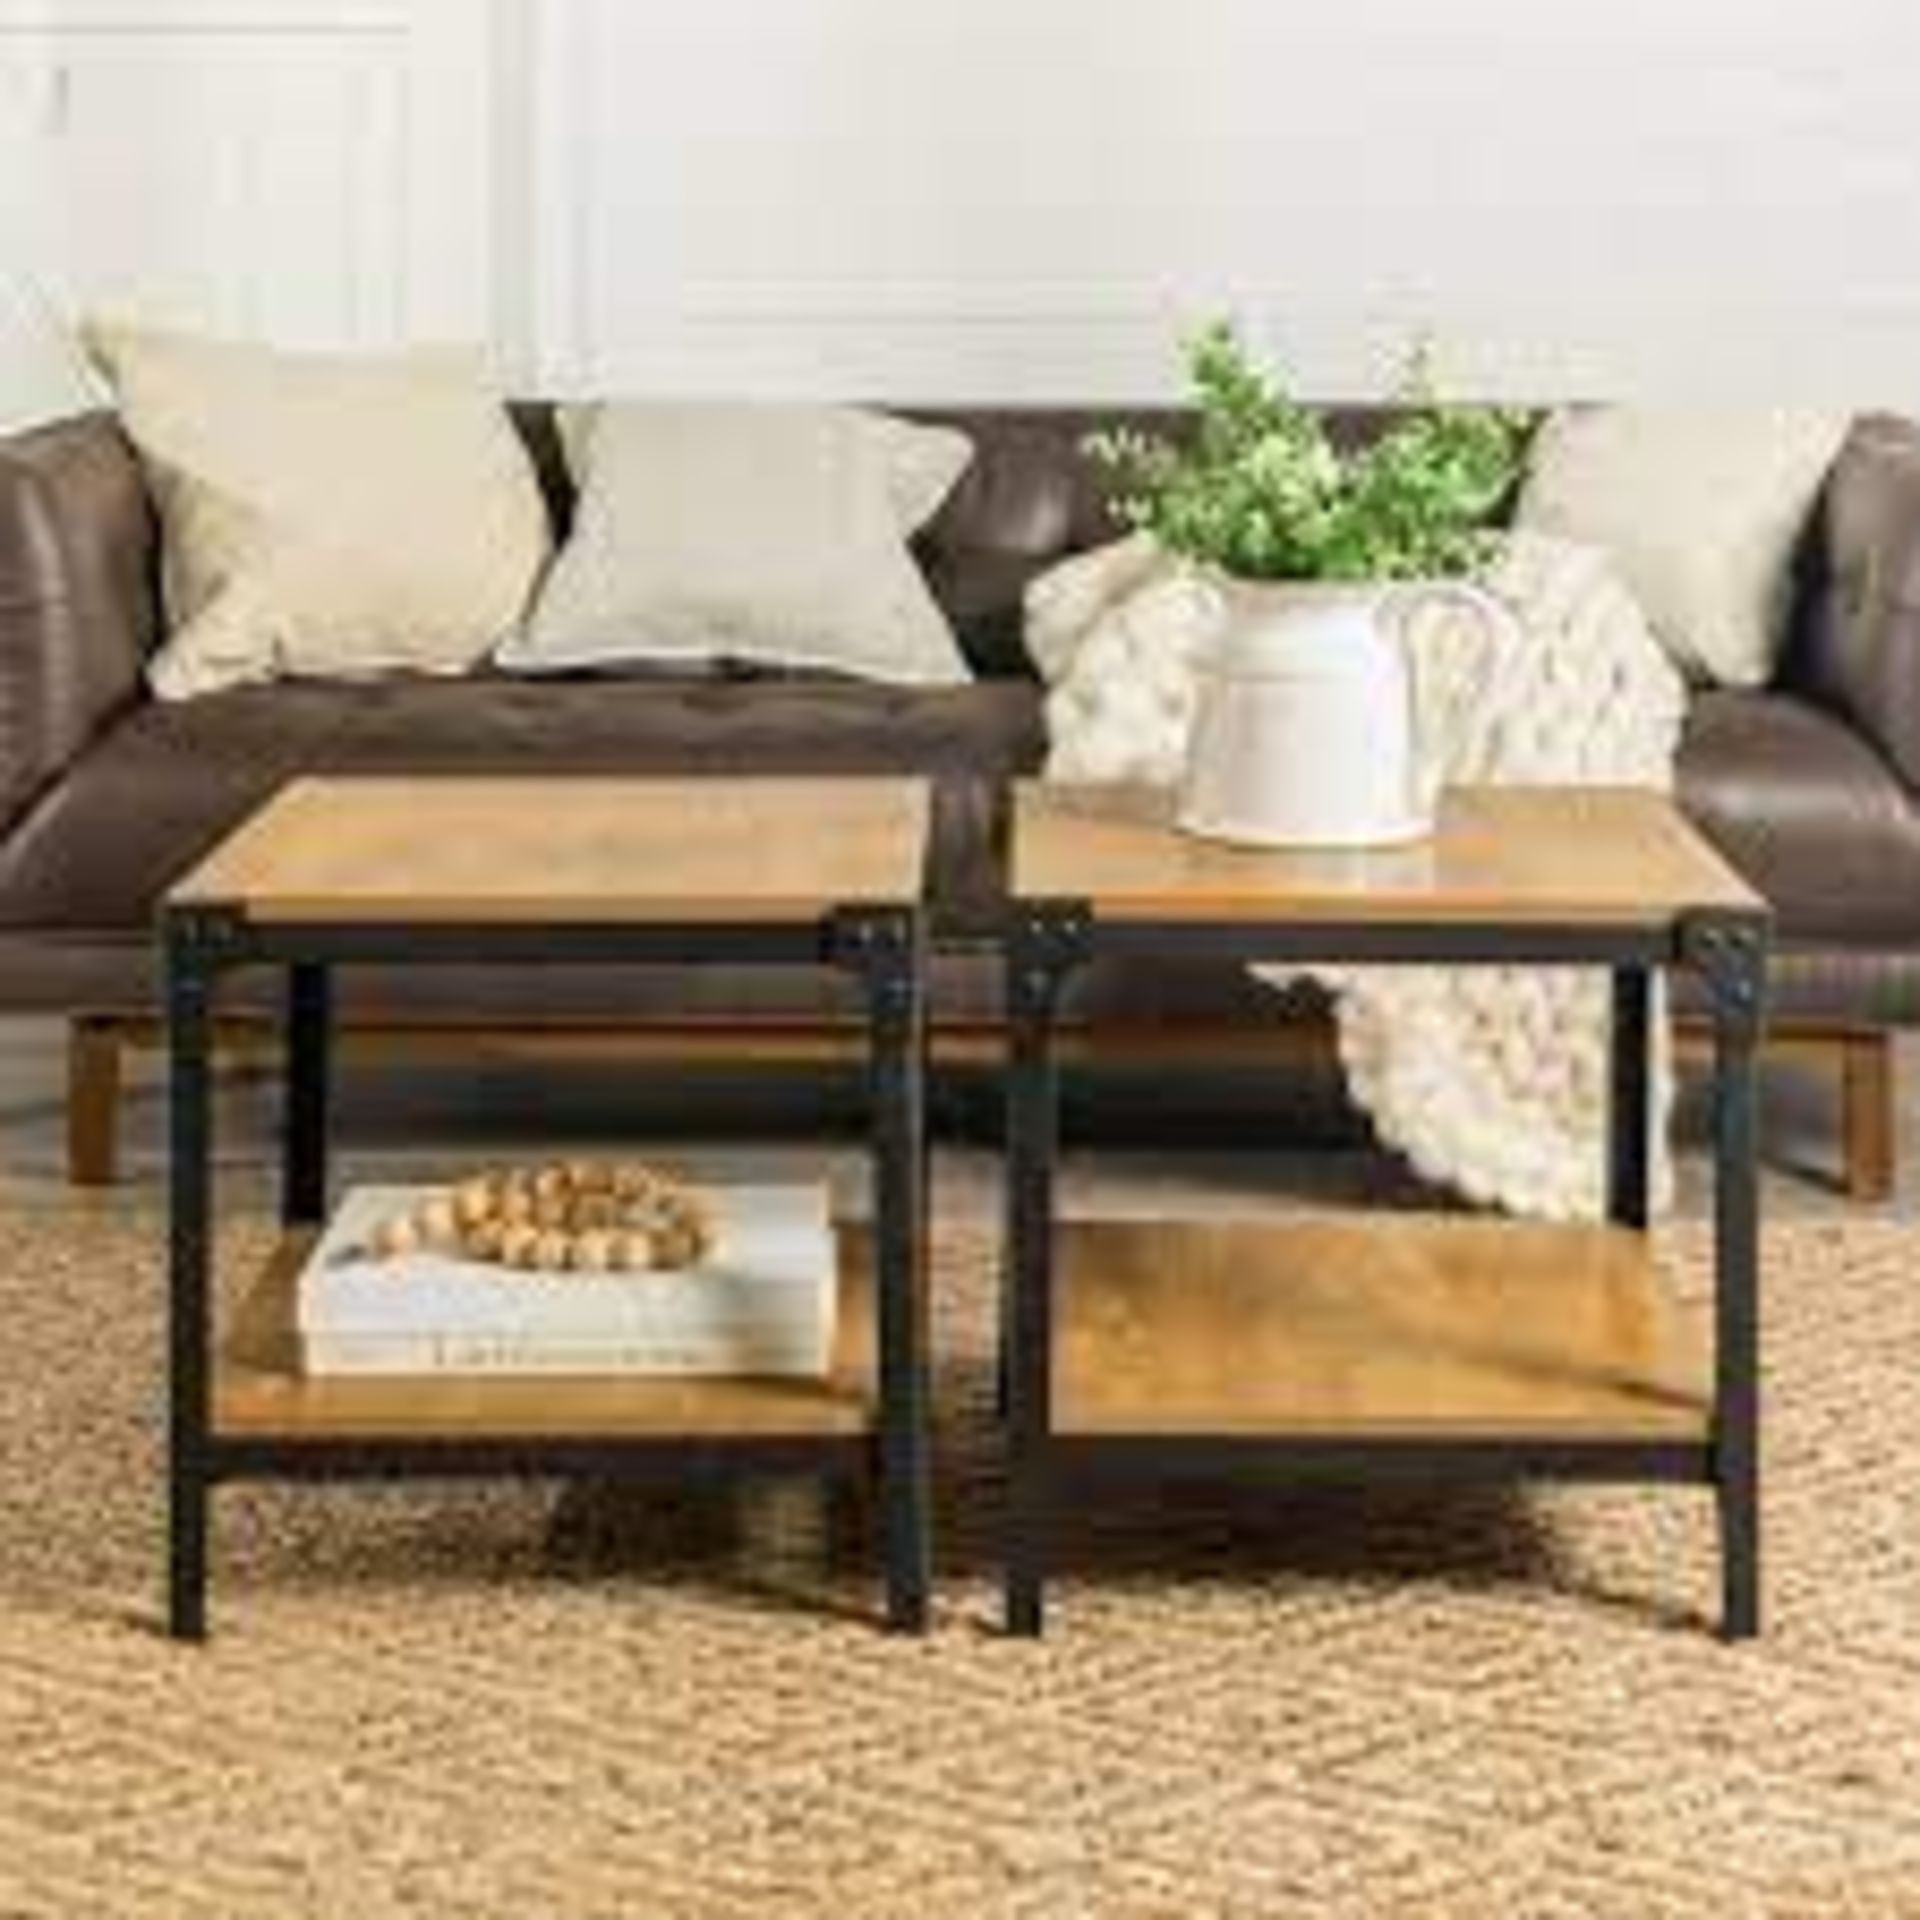 BOXED ANGLE IRON RUSTIC WOOD END TABLE BARNWOOD C20AISTBW RRP £209.00 (AS SEEN IN WAYFAIR)